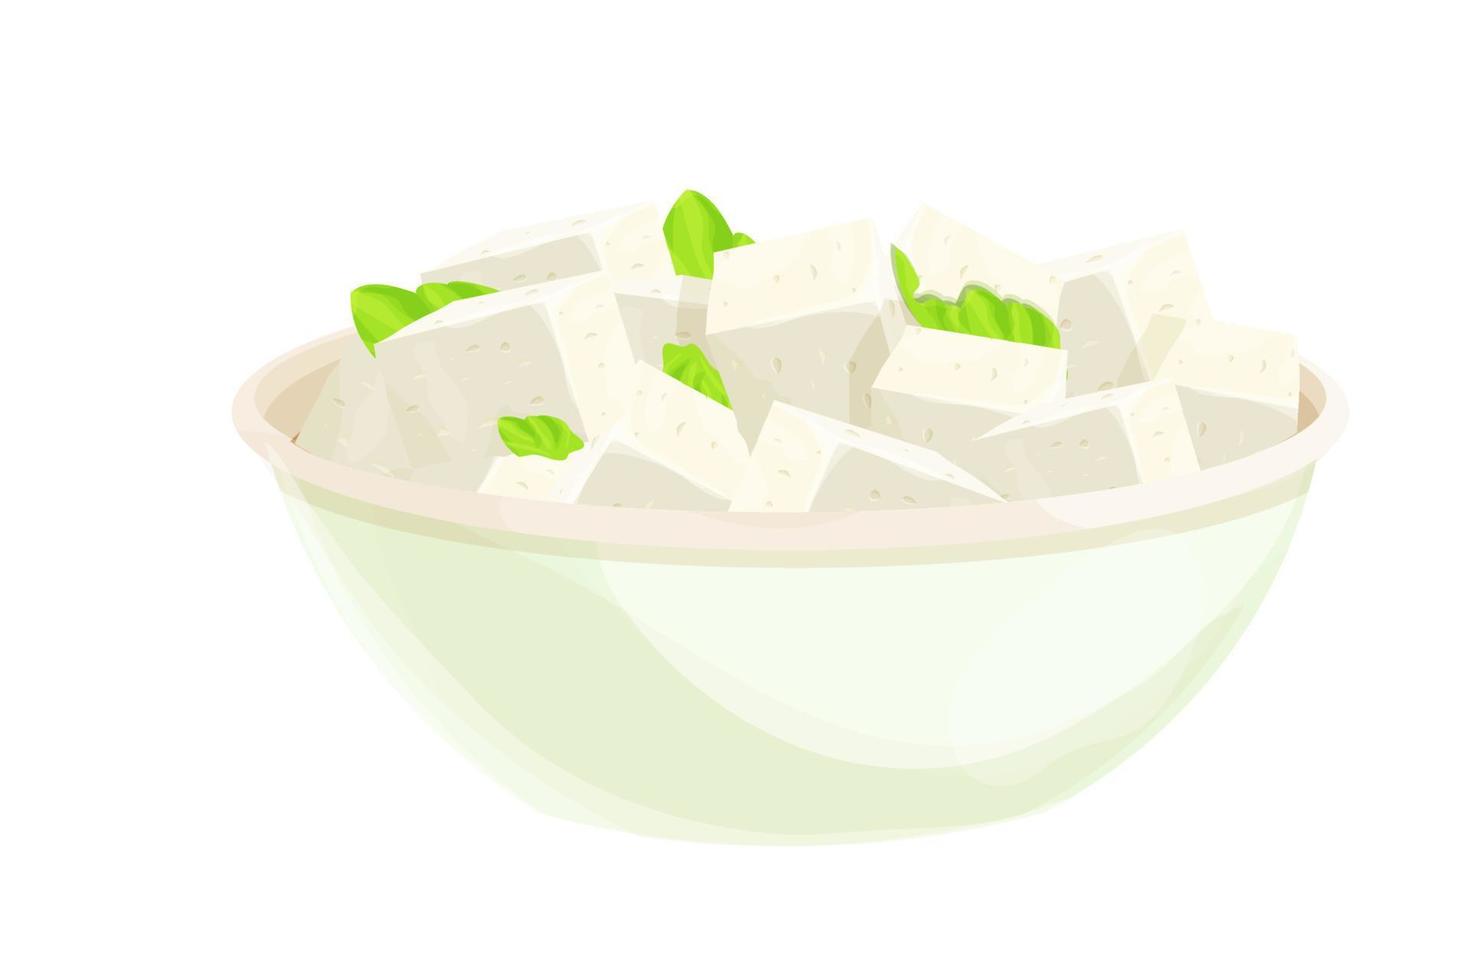 Feta cheese pieces in bowl in cartoon style detailed ingredient isolated on white background. Greek curd white cheese made from ships milk or milk bean. . Vector illustration